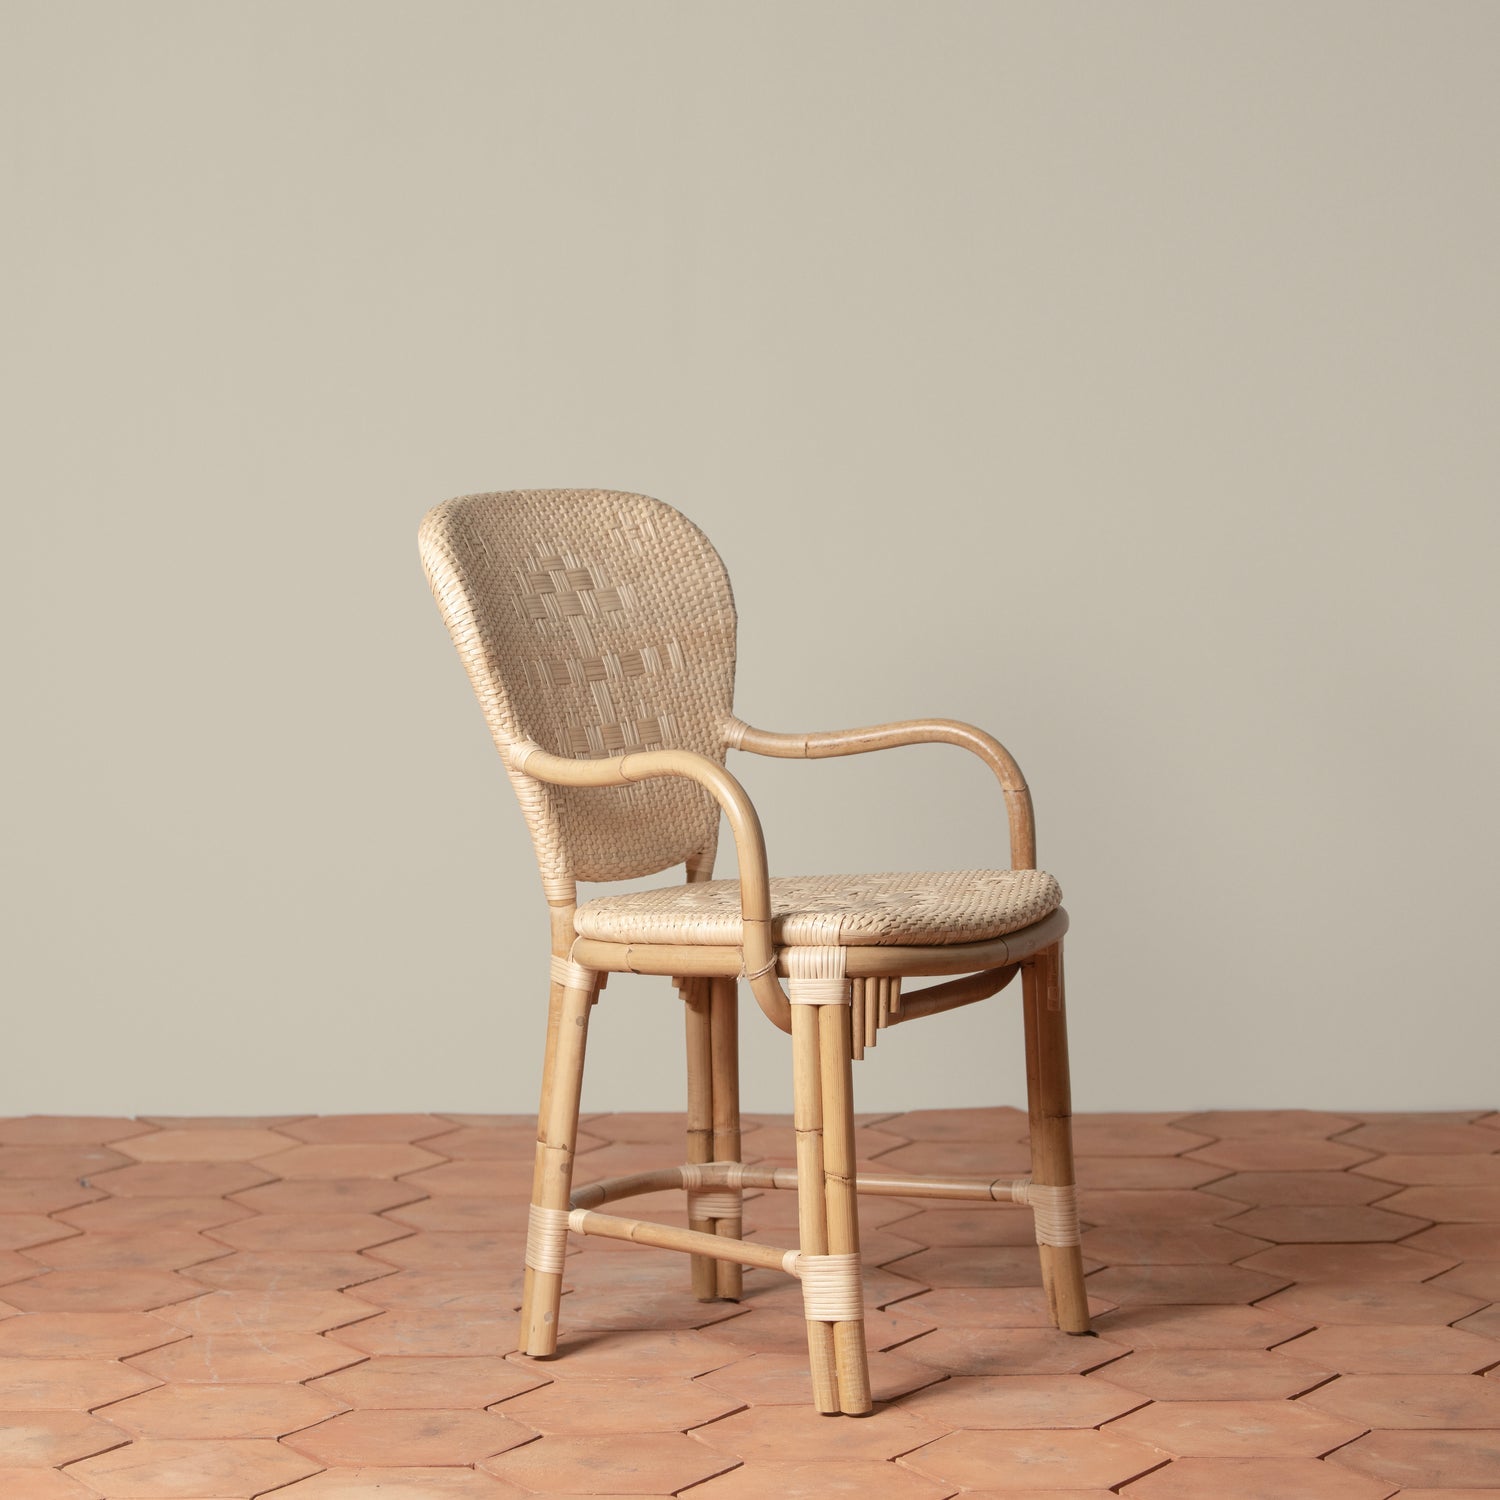 On an ivory background is a rattan chair with a woven rattan seat and backrest. 